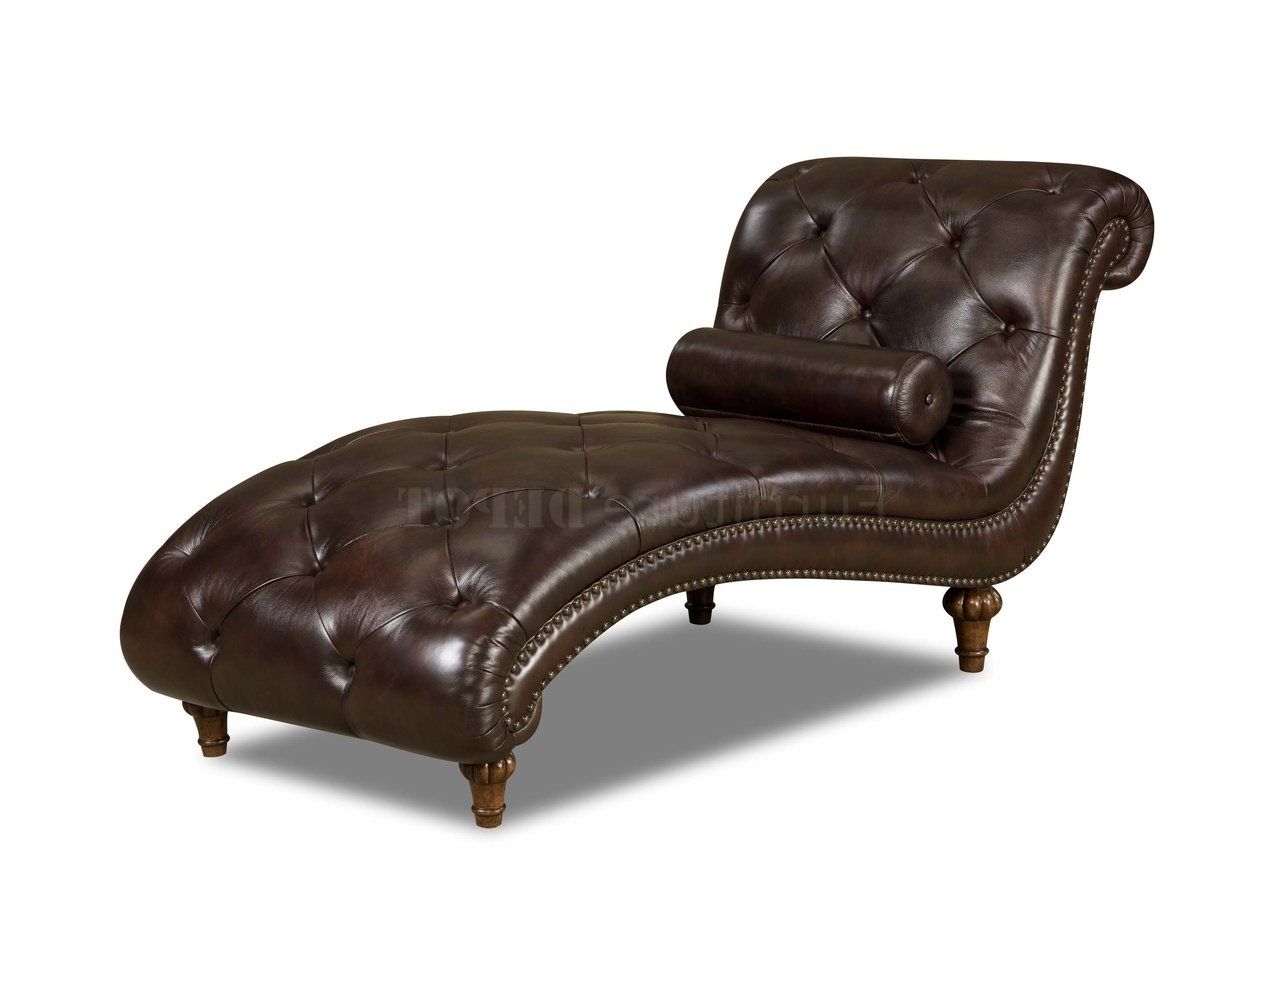 Brown Leather Chaise Lounges Intended For 2017 Brown Leather Chaise Lounge Chair • Lounge Chairs Ideas (View 2 of 15)